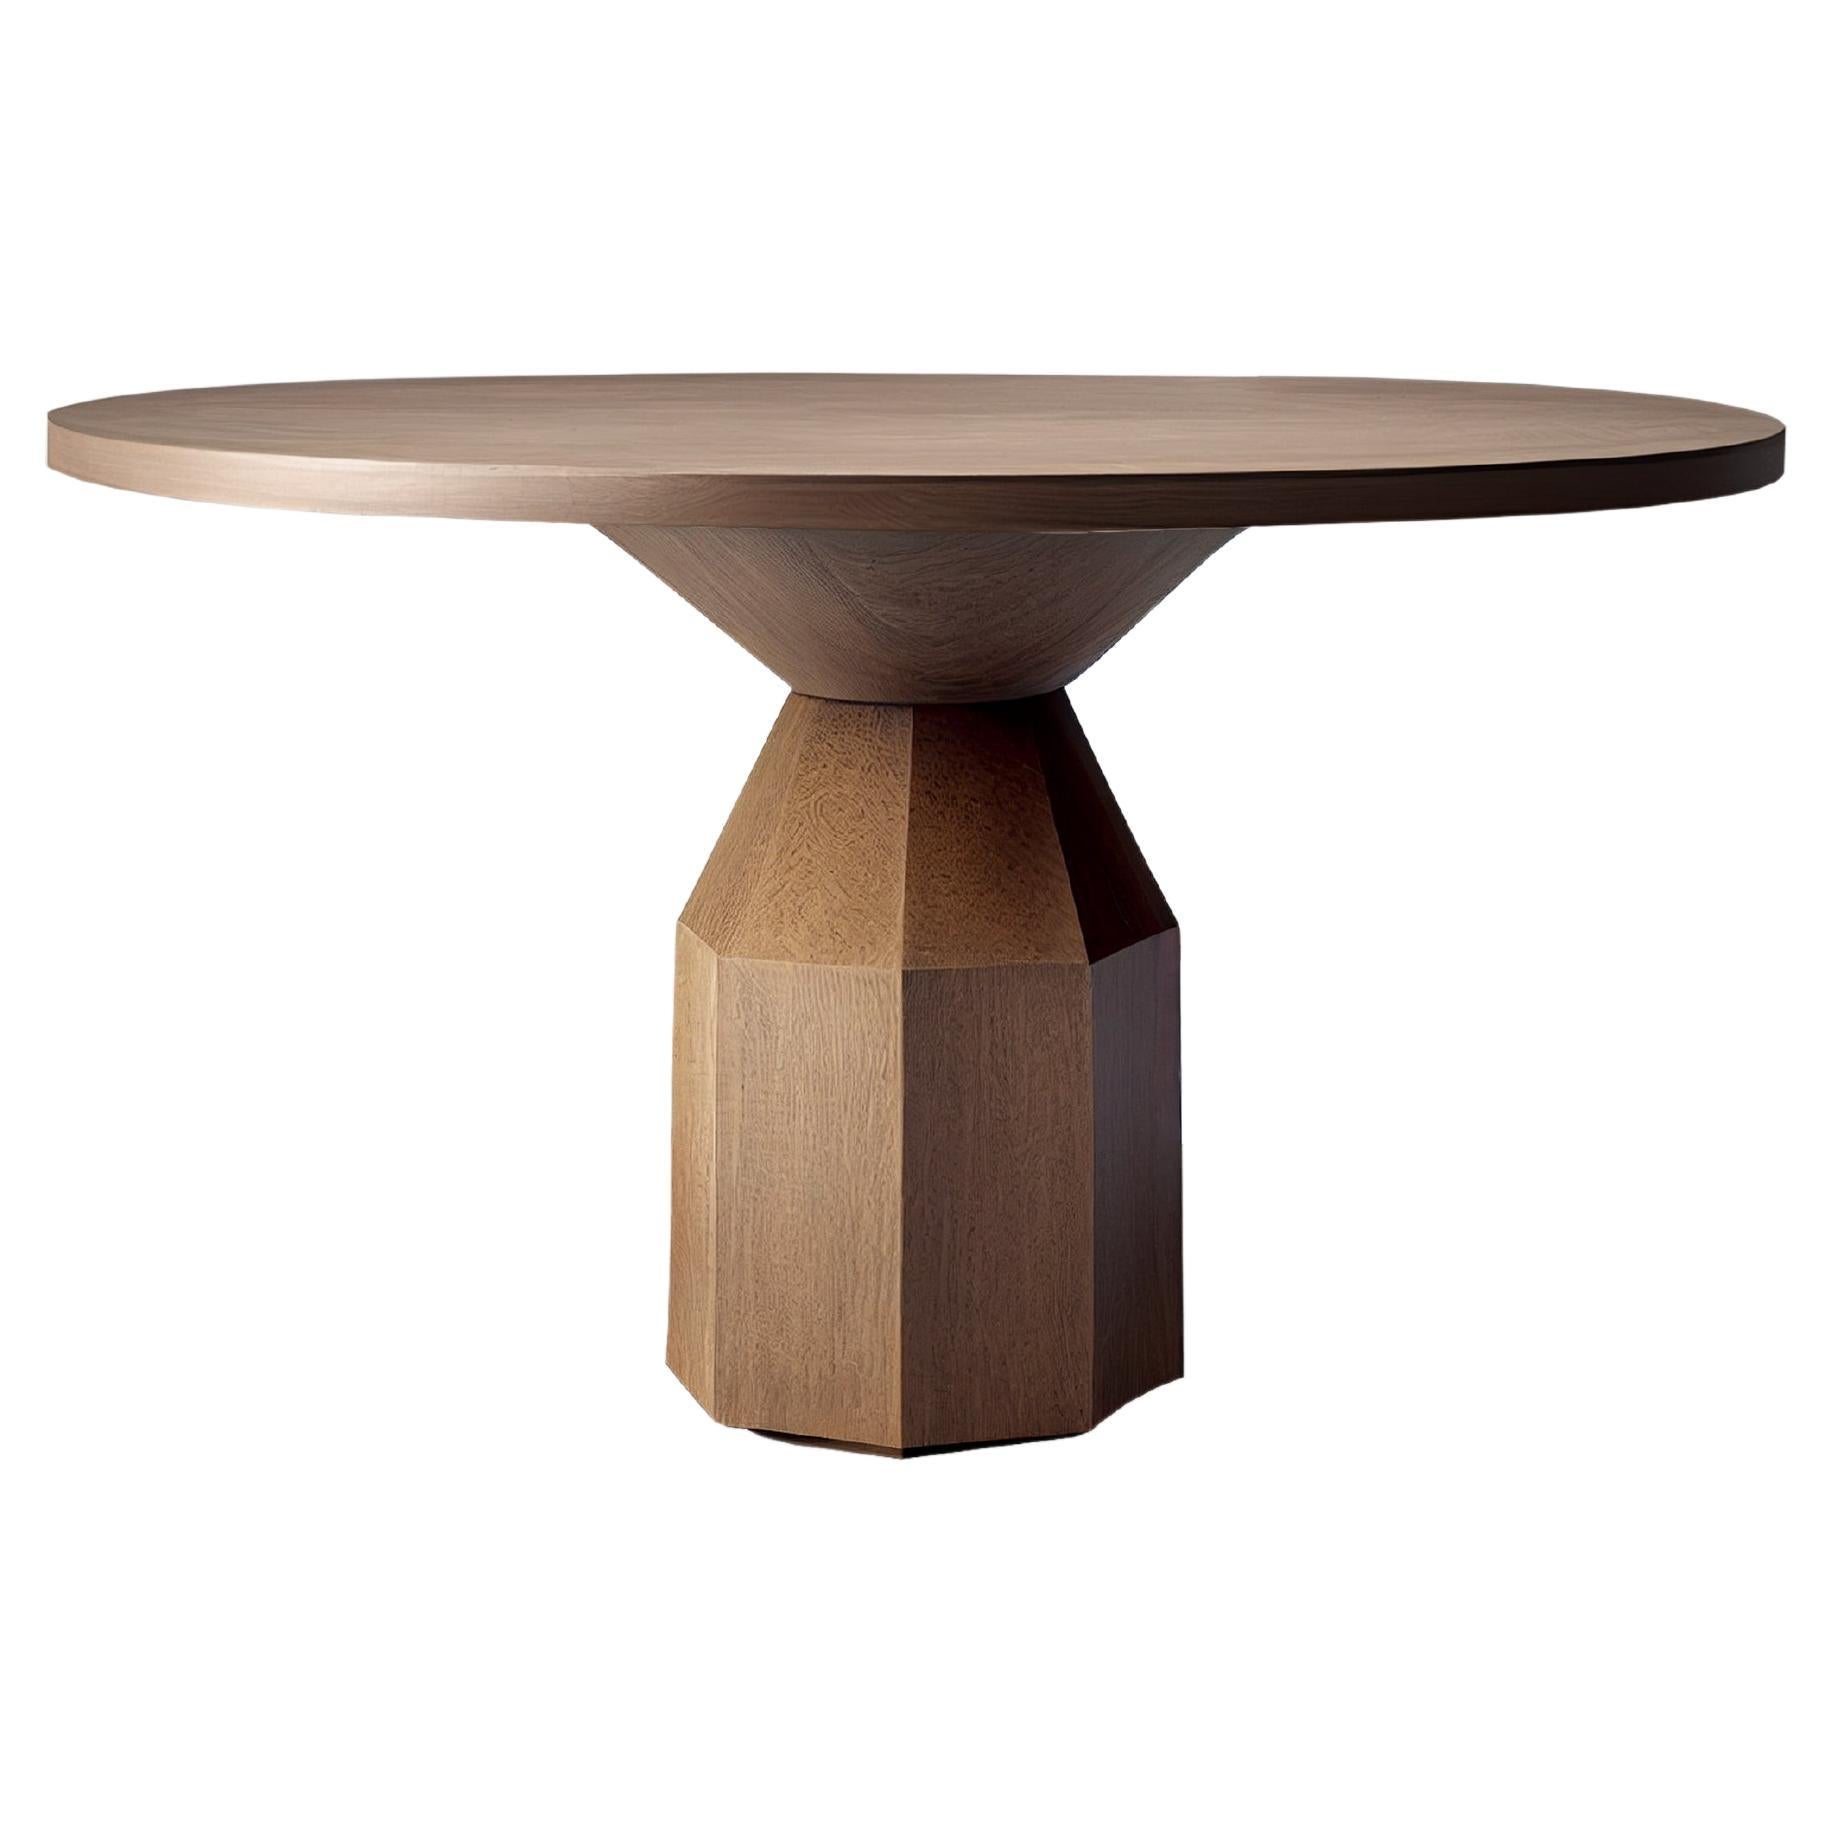 Moka Dining Table C, Round Table for Four by Nono 